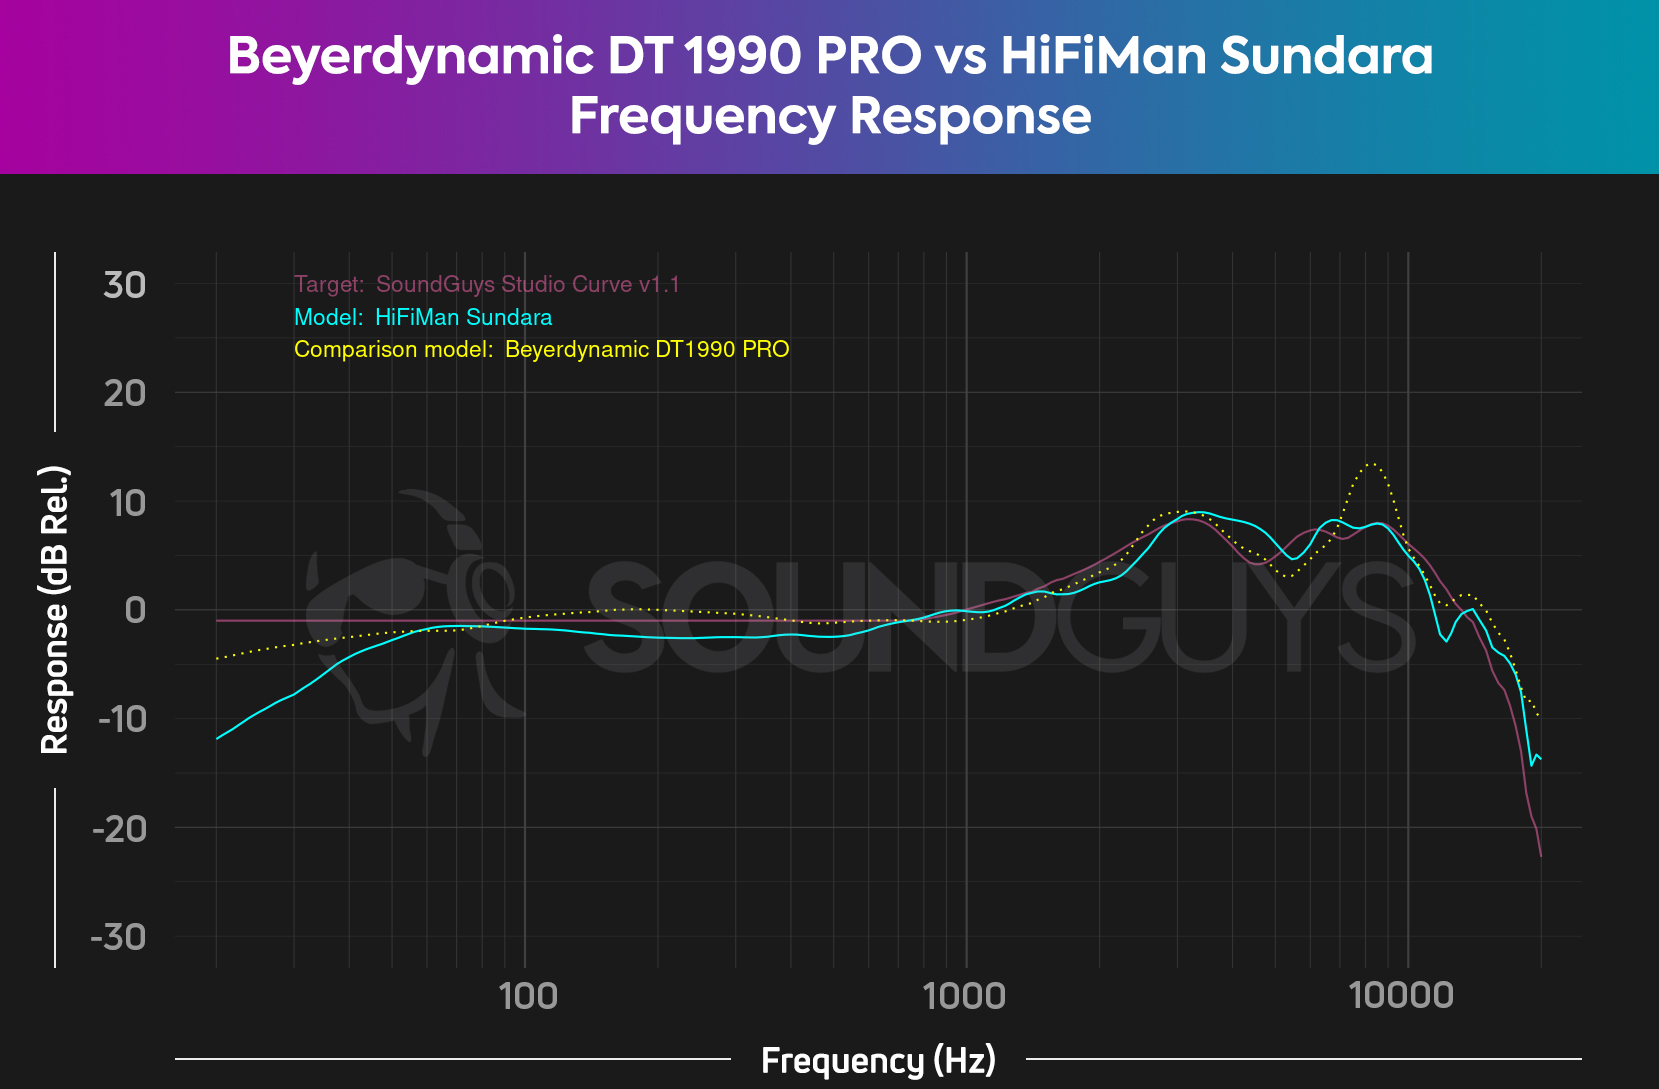 A chart compares the HiFiMan Sundara and Beyerdynamic DT 1990 PRO frequency responses.